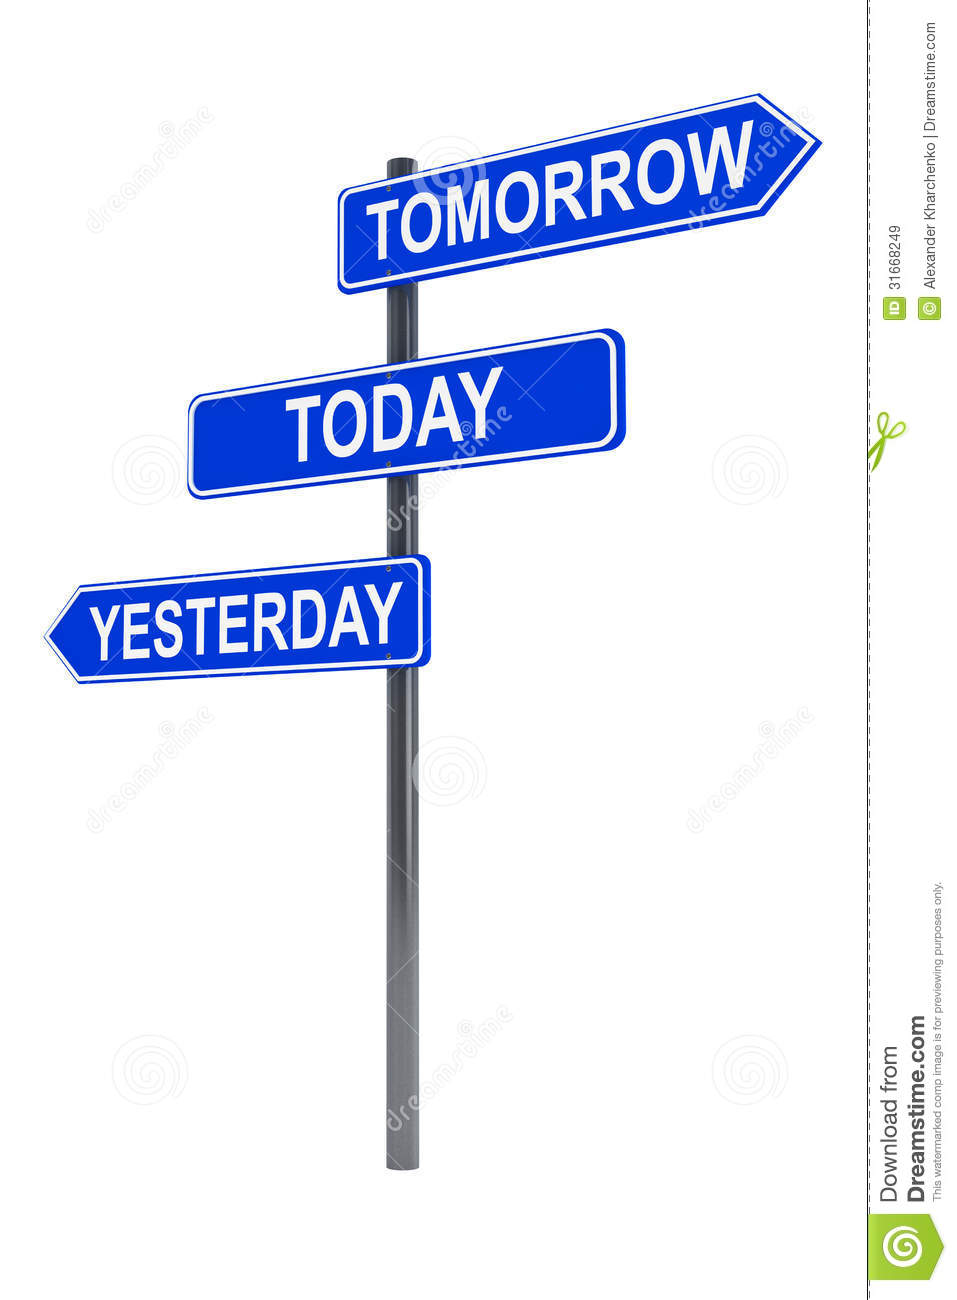 Tomorrow Today And Yesterday Road Sign Royalty Free Stock Images